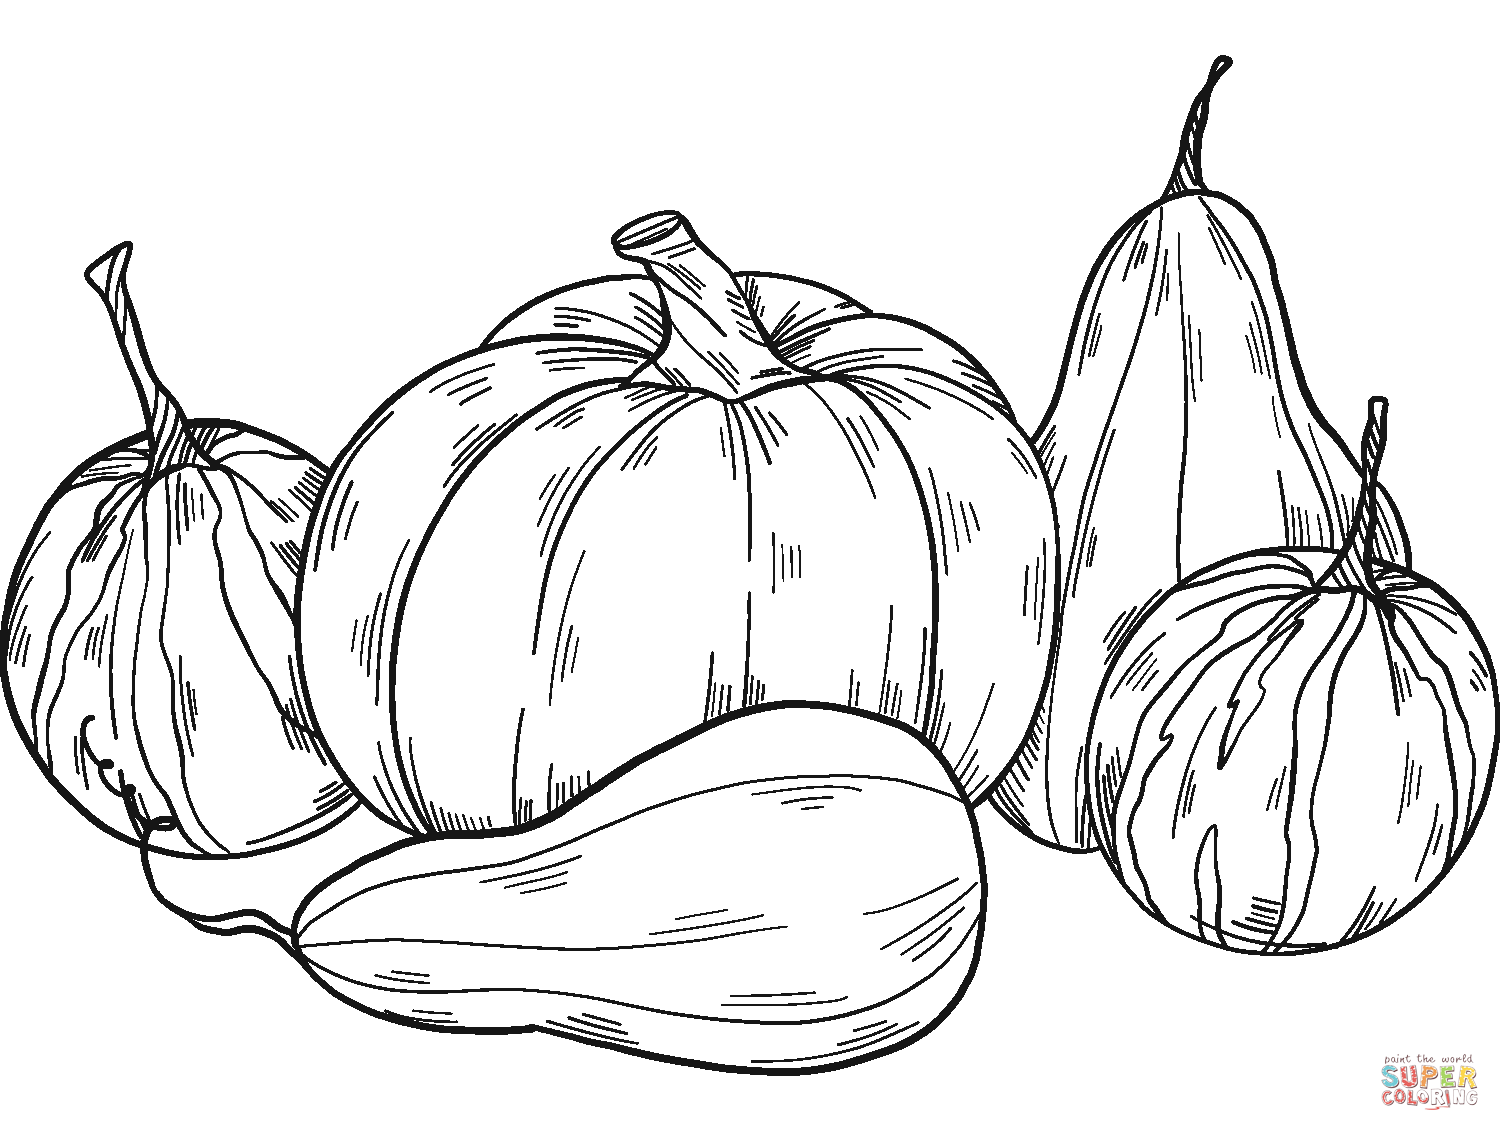 Pumpkin patch coloring page free printable coloring pages pumpkin coloring pages coloring pages pumpkin drawing